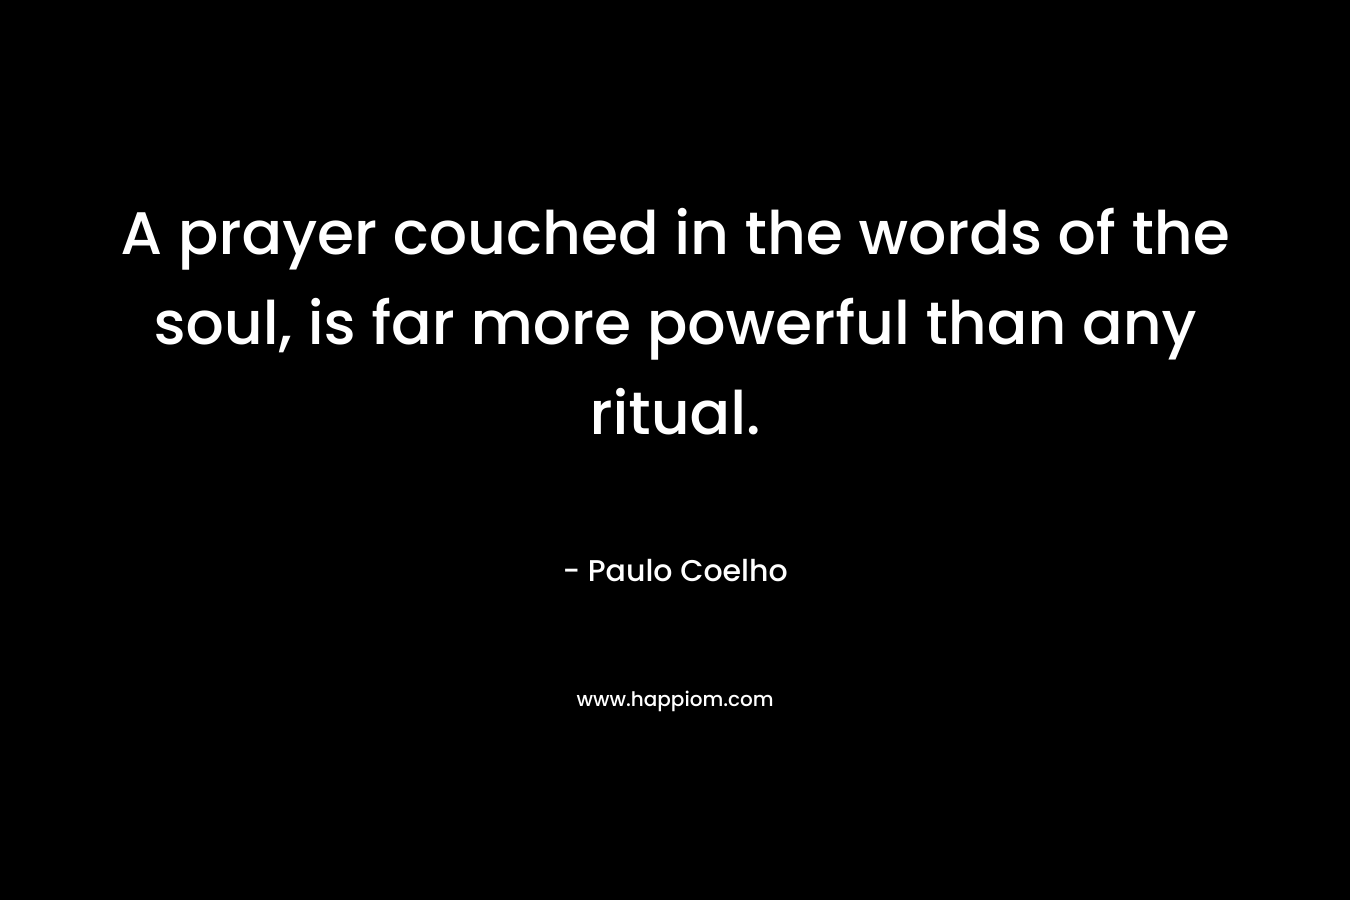 A prayer couched in the words of the soul, is far more powerful than any ritual.